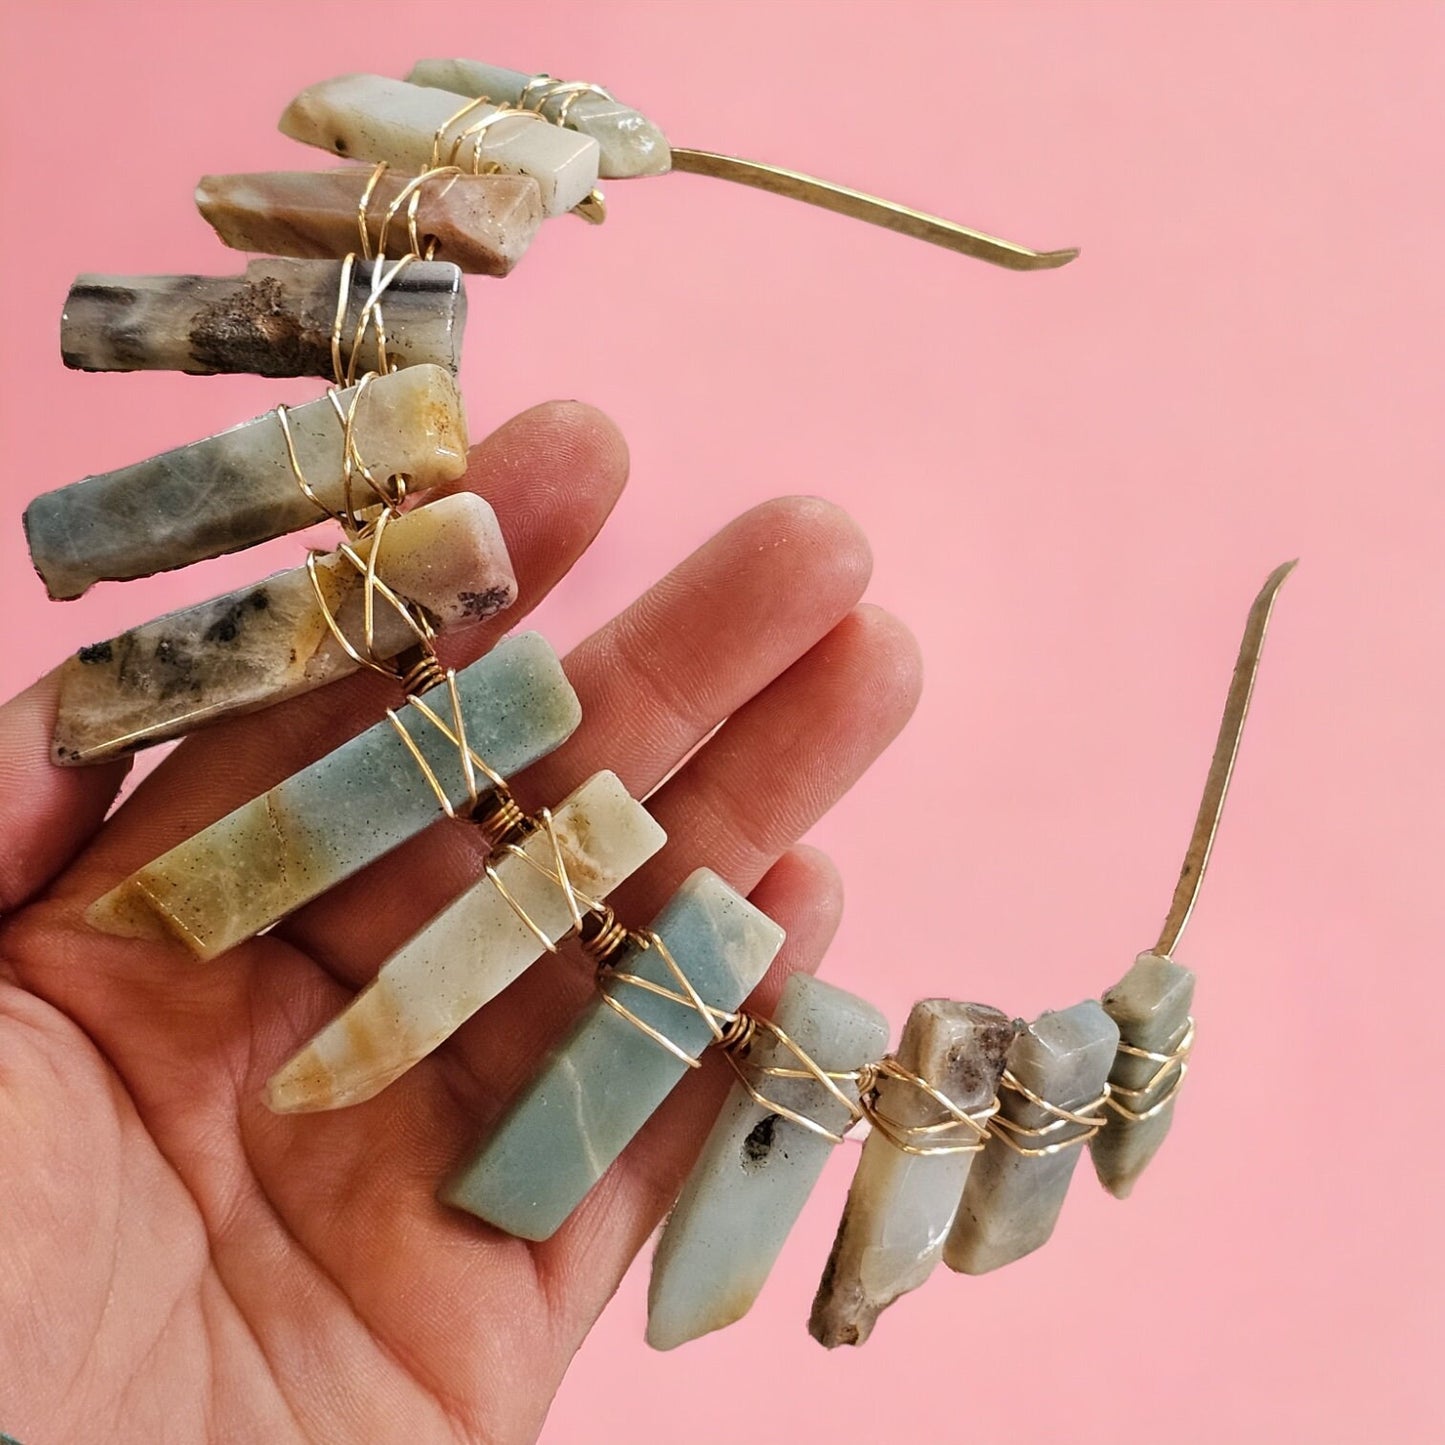 Amazonite Crystal Crown for Balance & Alignment